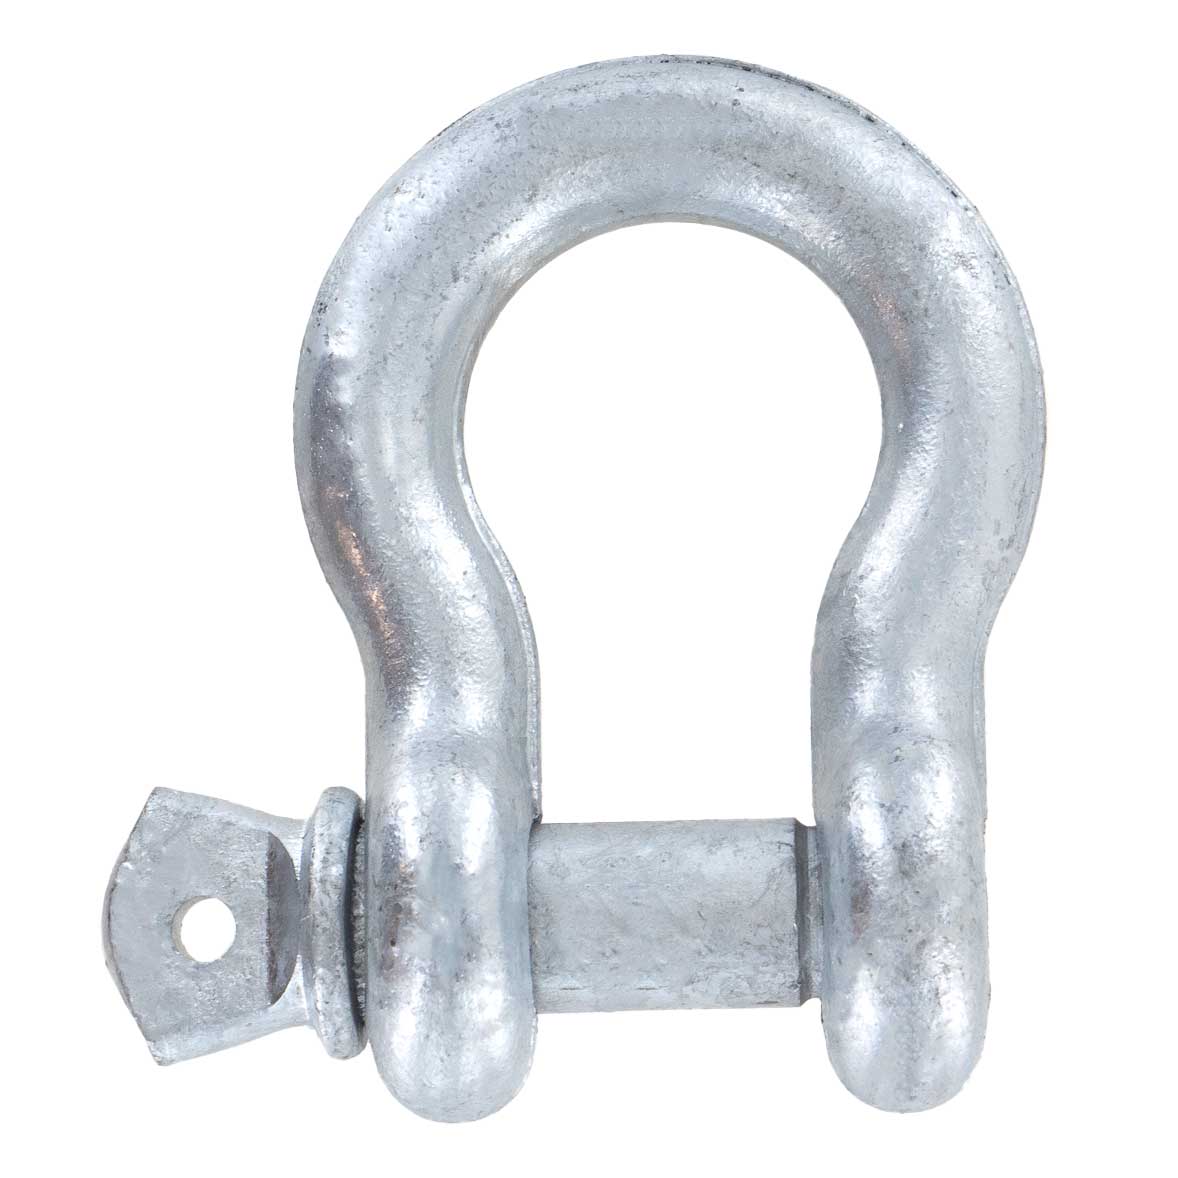 1-1/8" Galvanized Screw Pin Anchor Shackle - 9.5 Ton rear view